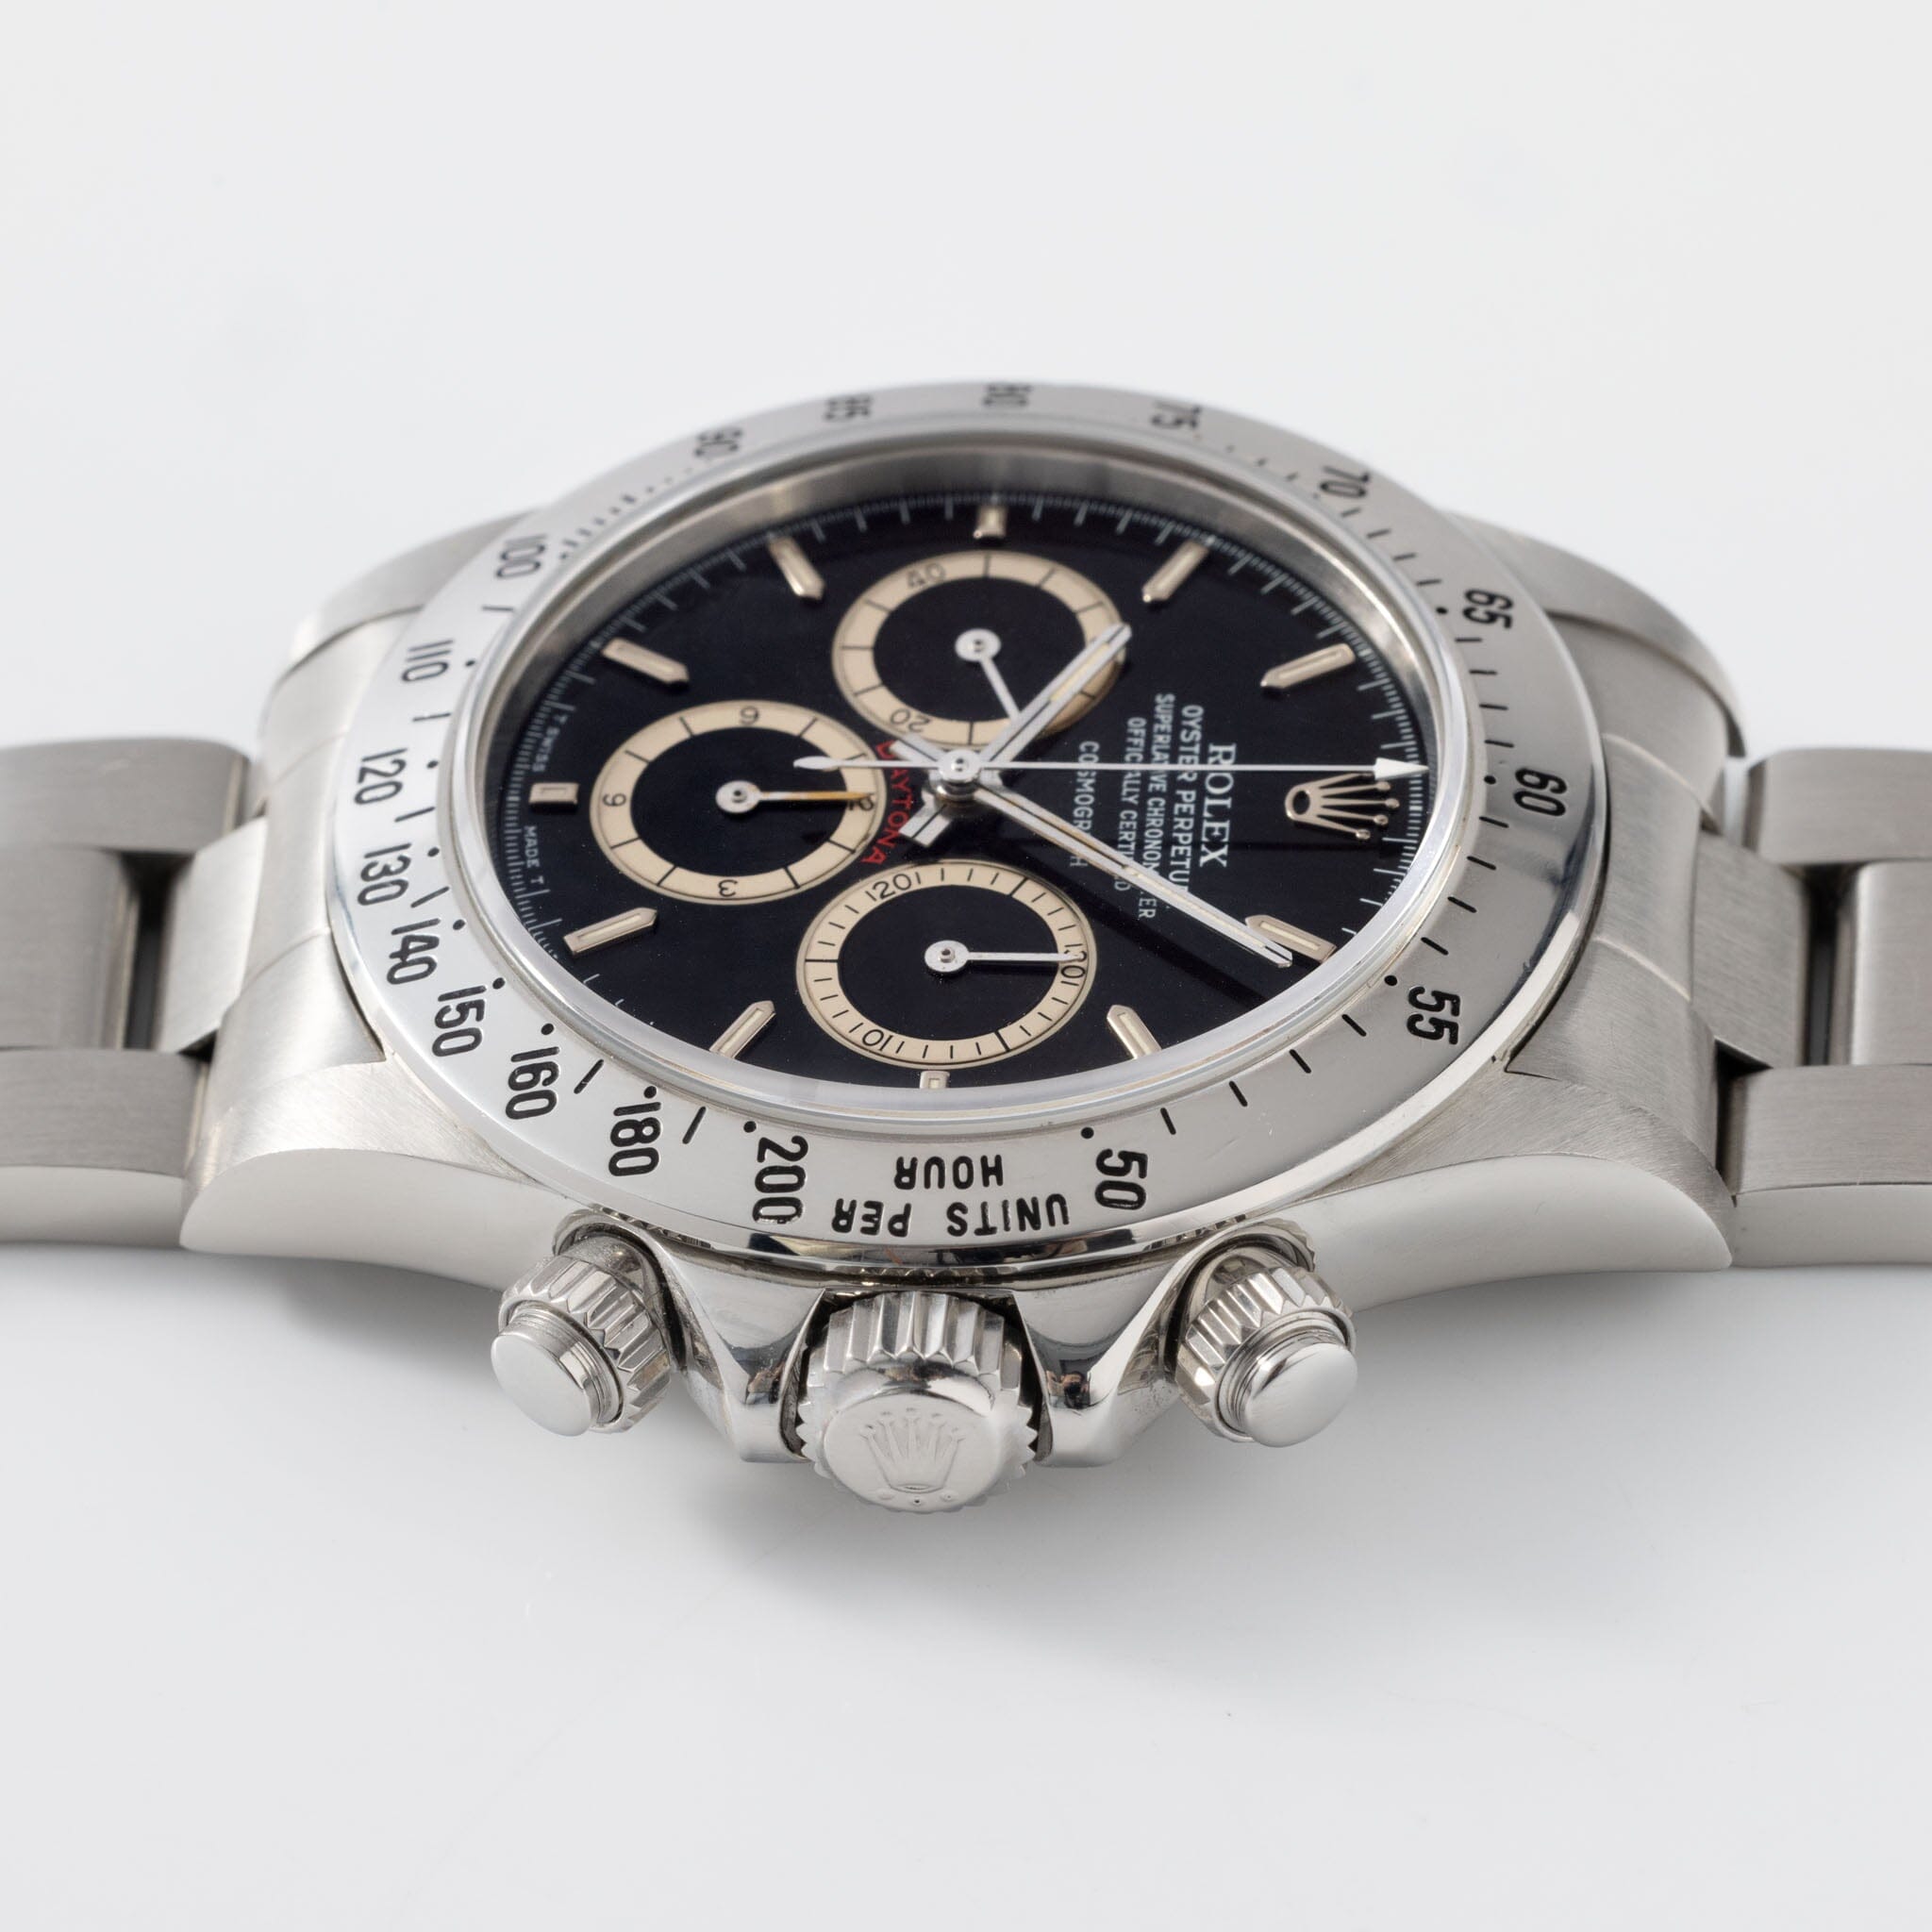 Rolex Daytona Steel 16520 Black Floating Dial with Papers